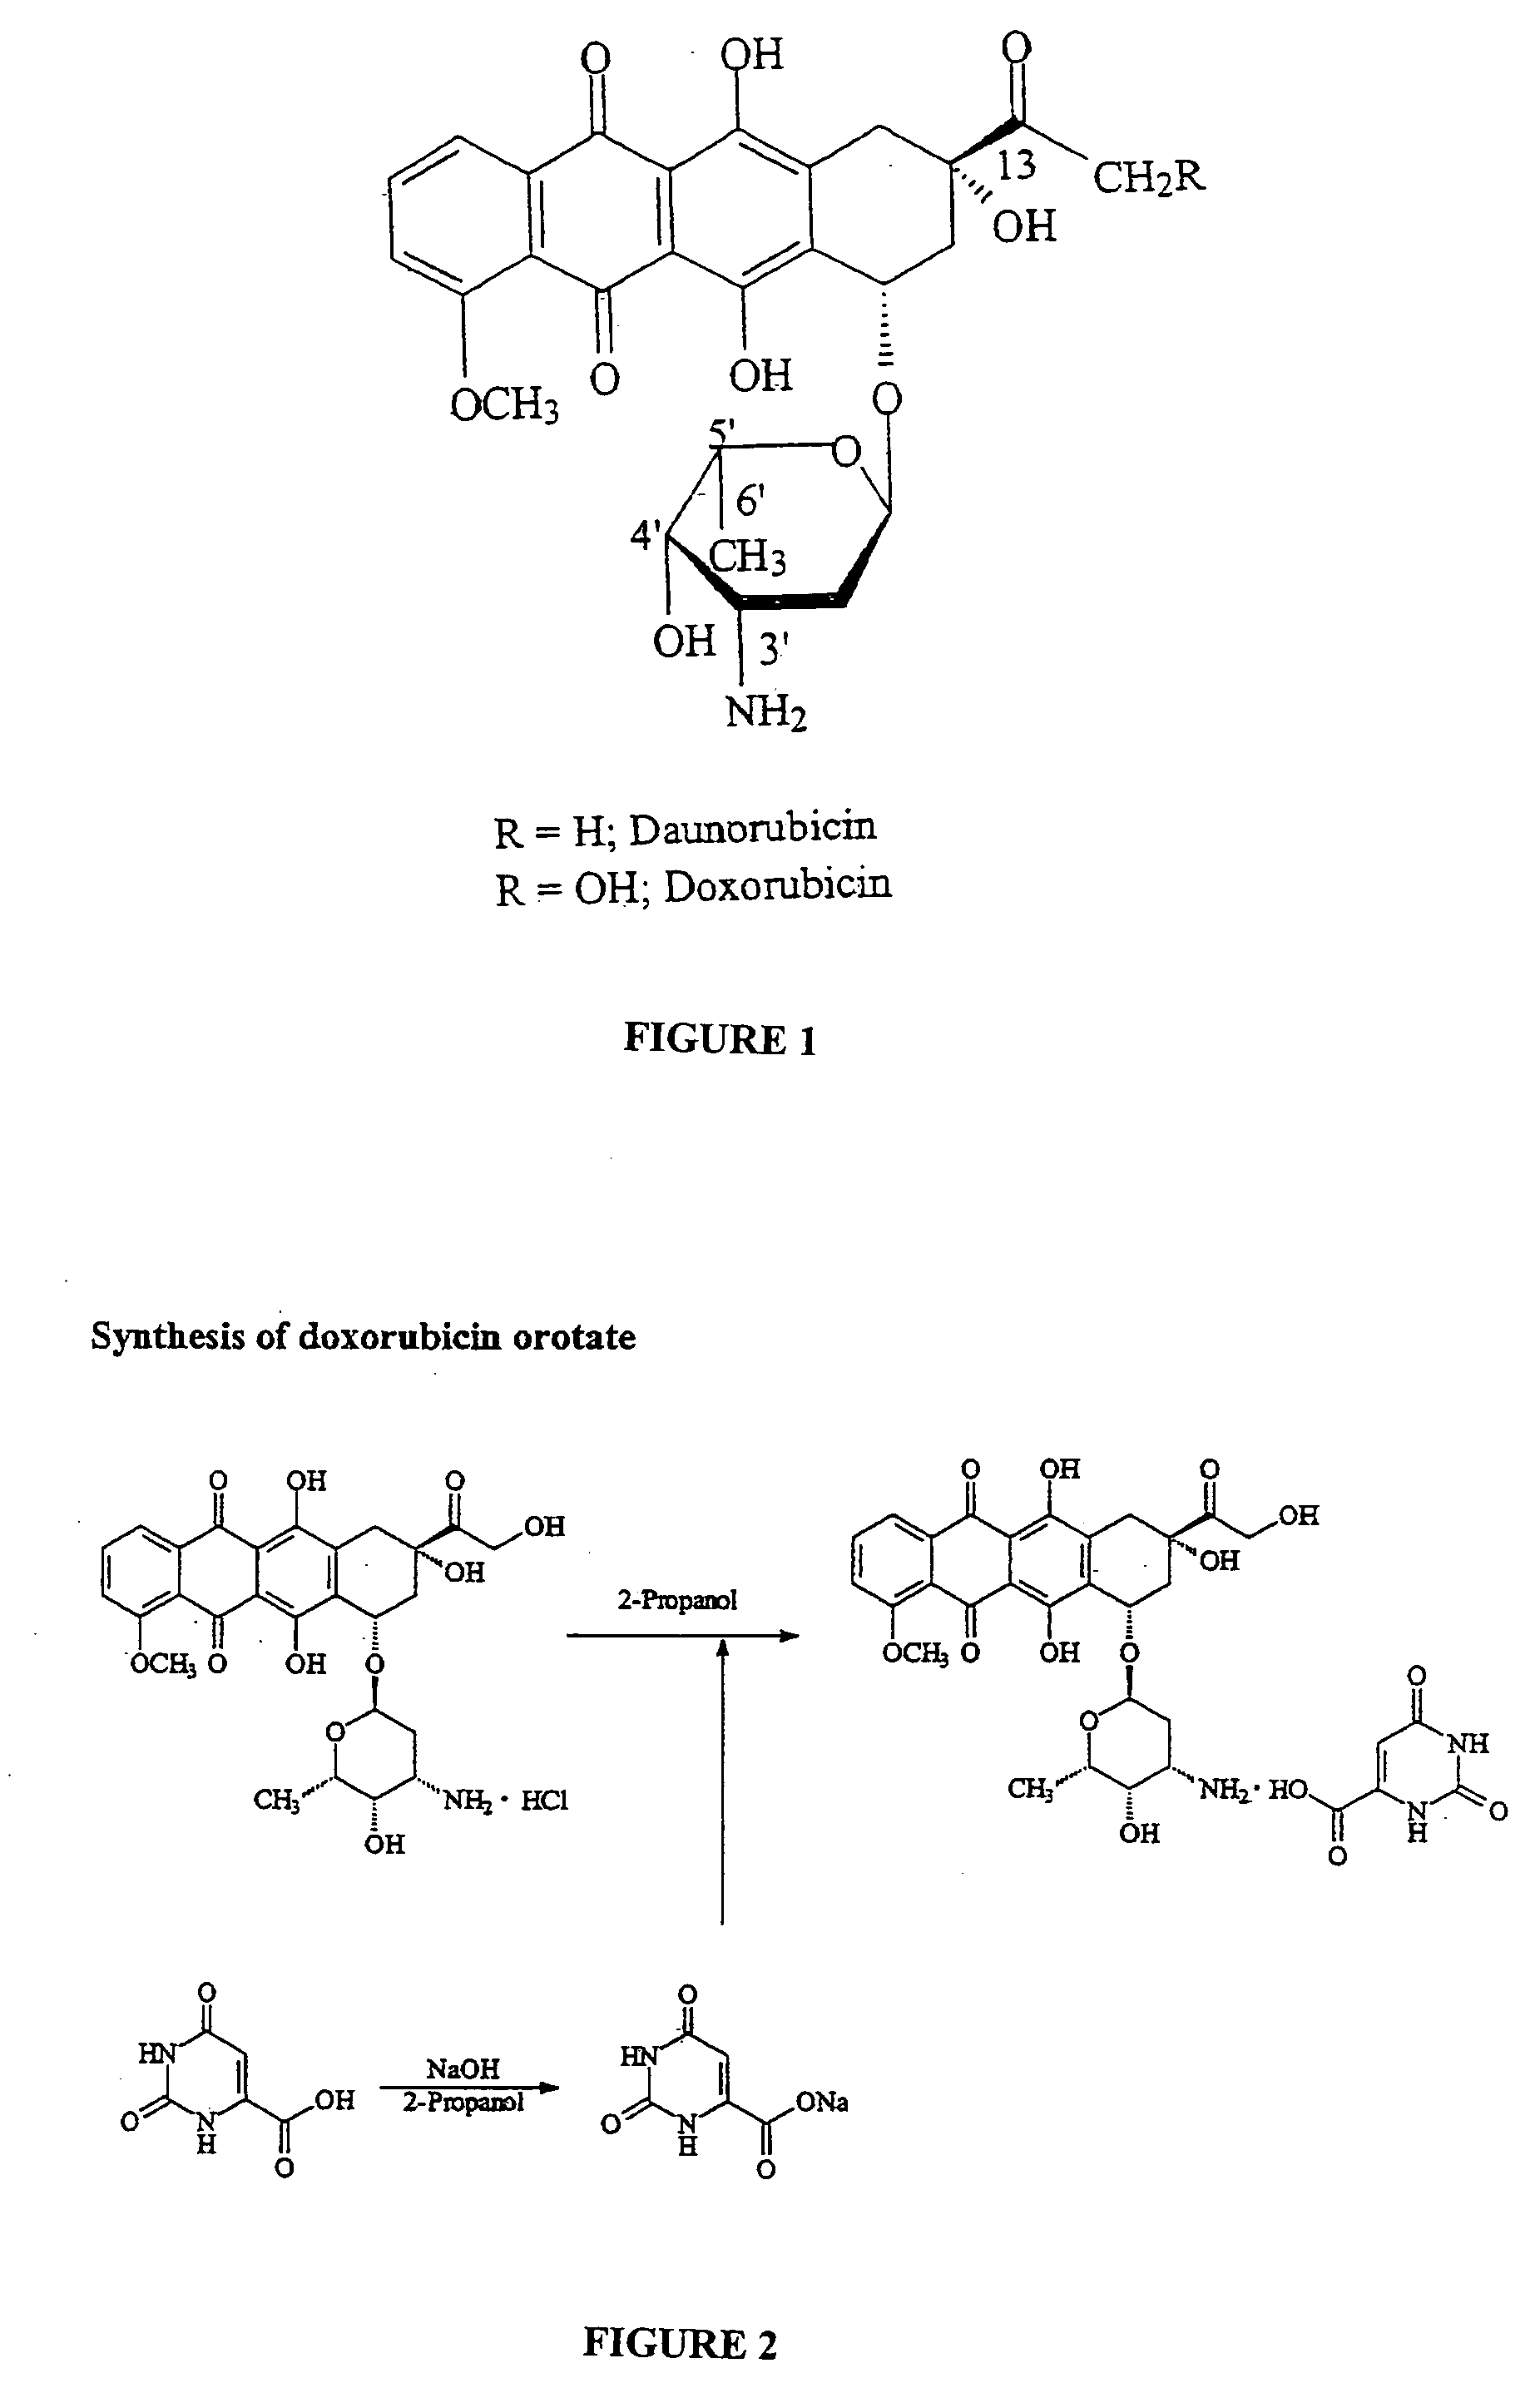 Compositions and methods of reducing tissue levels of drugs when given as orotate derivatives